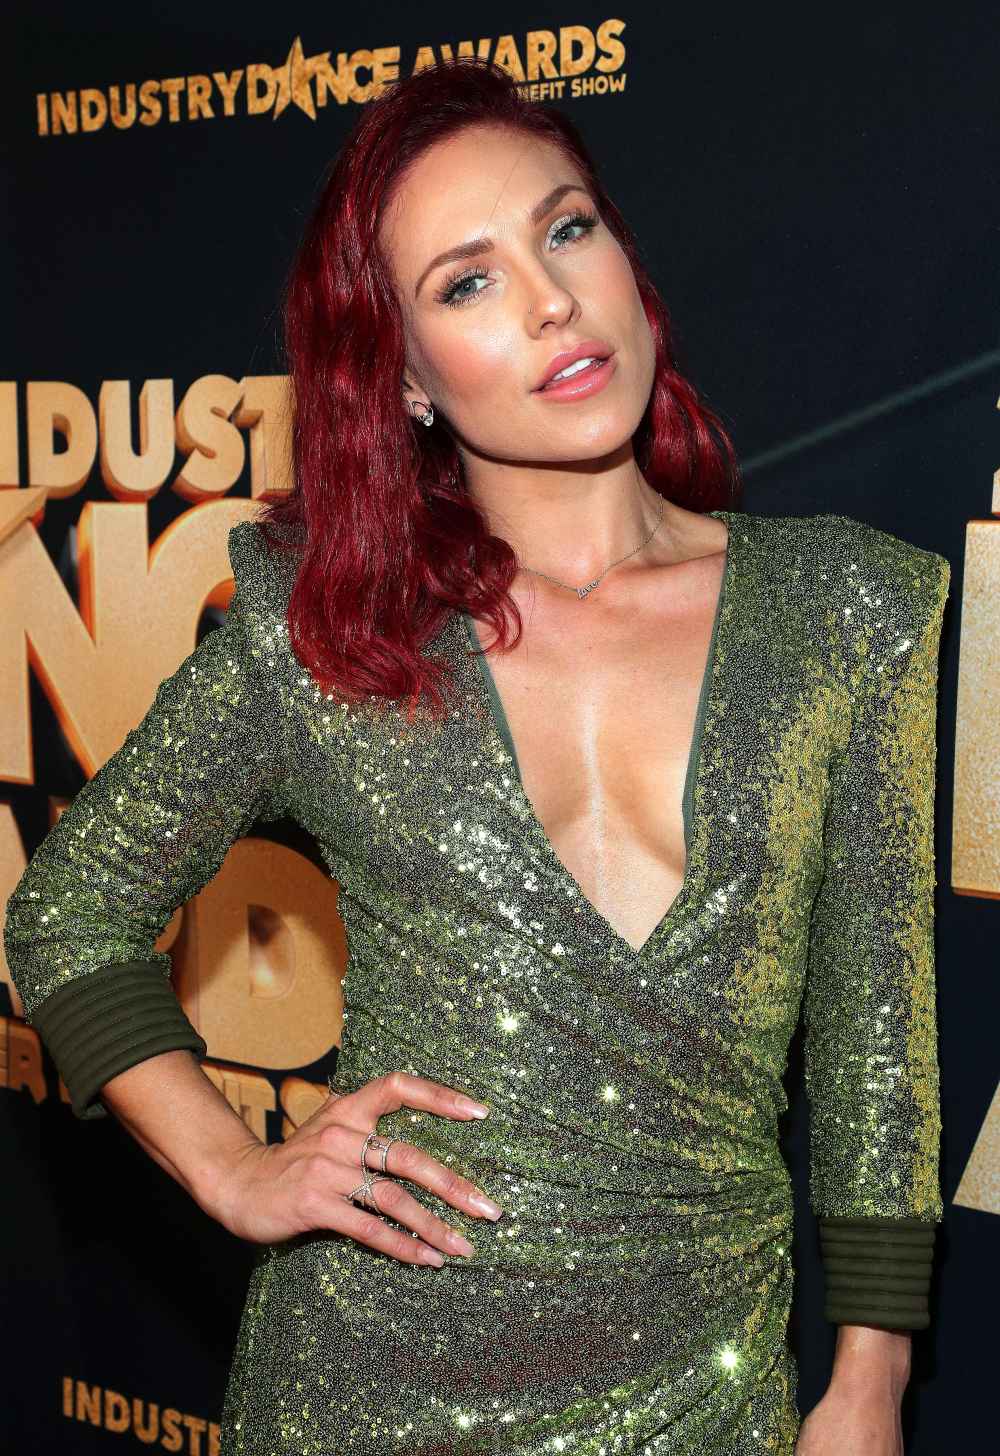 Sharna Burgess Attends Dancing With the Stars Season 28 Premiere After Axing